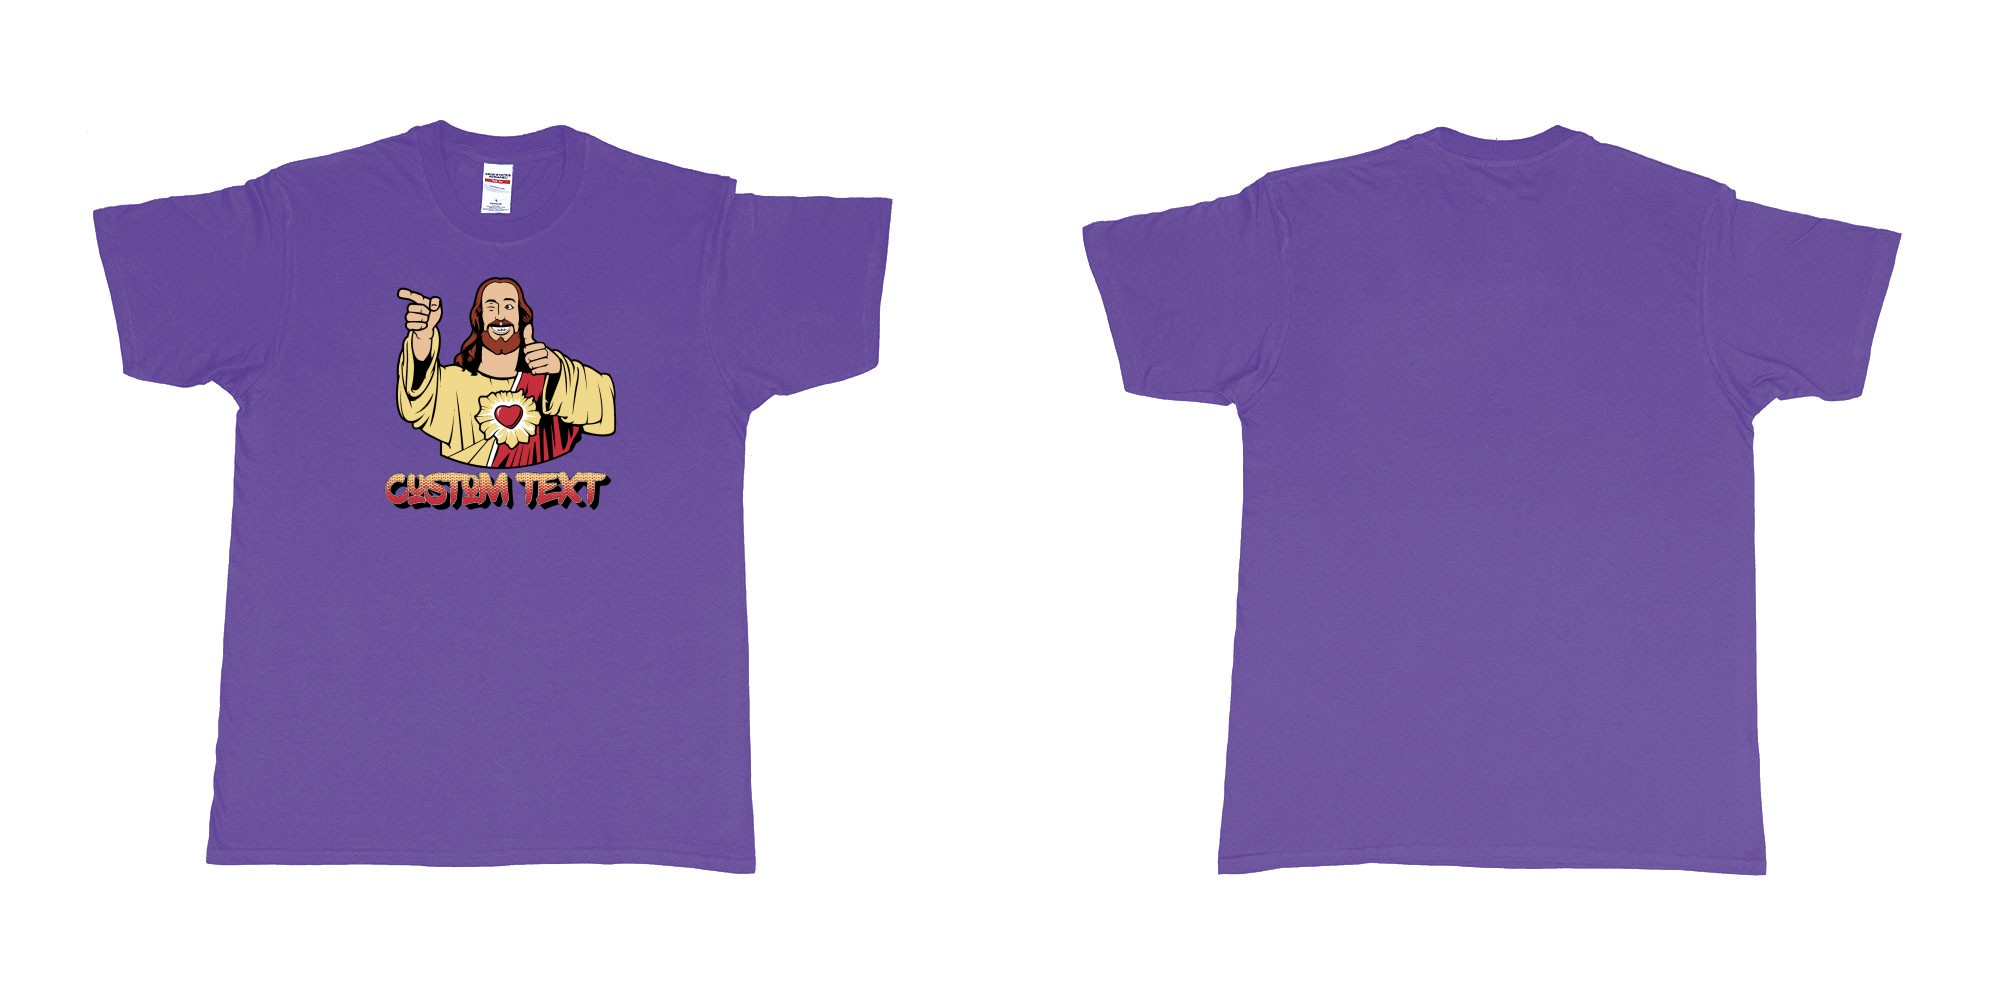 Custom tshirt design buddy christ custom text in fabric color purple choice your own text made in Bali by The Pirate Way